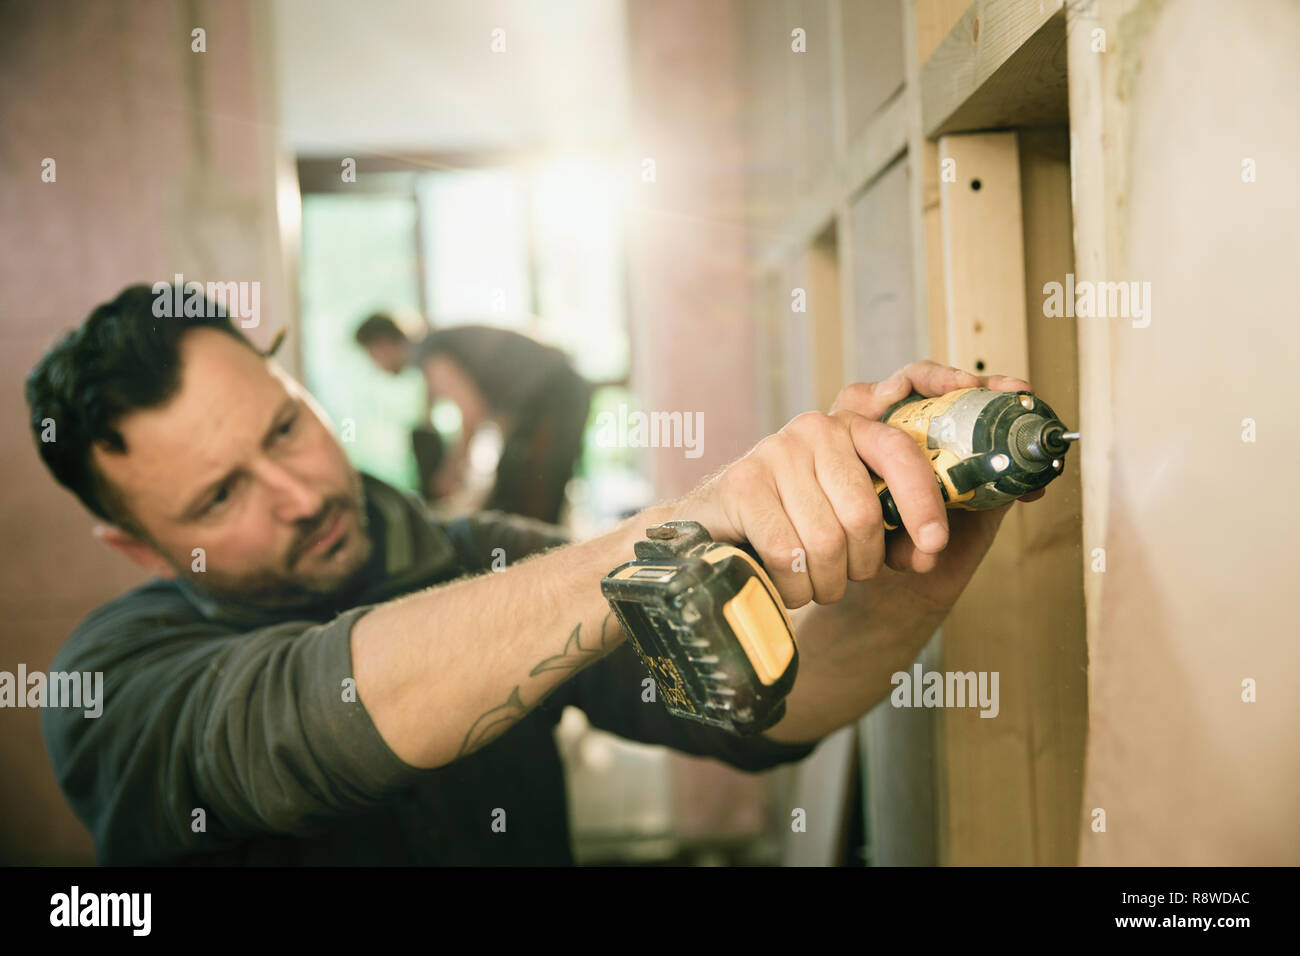 Focused construction worker using power drill Stock Photo